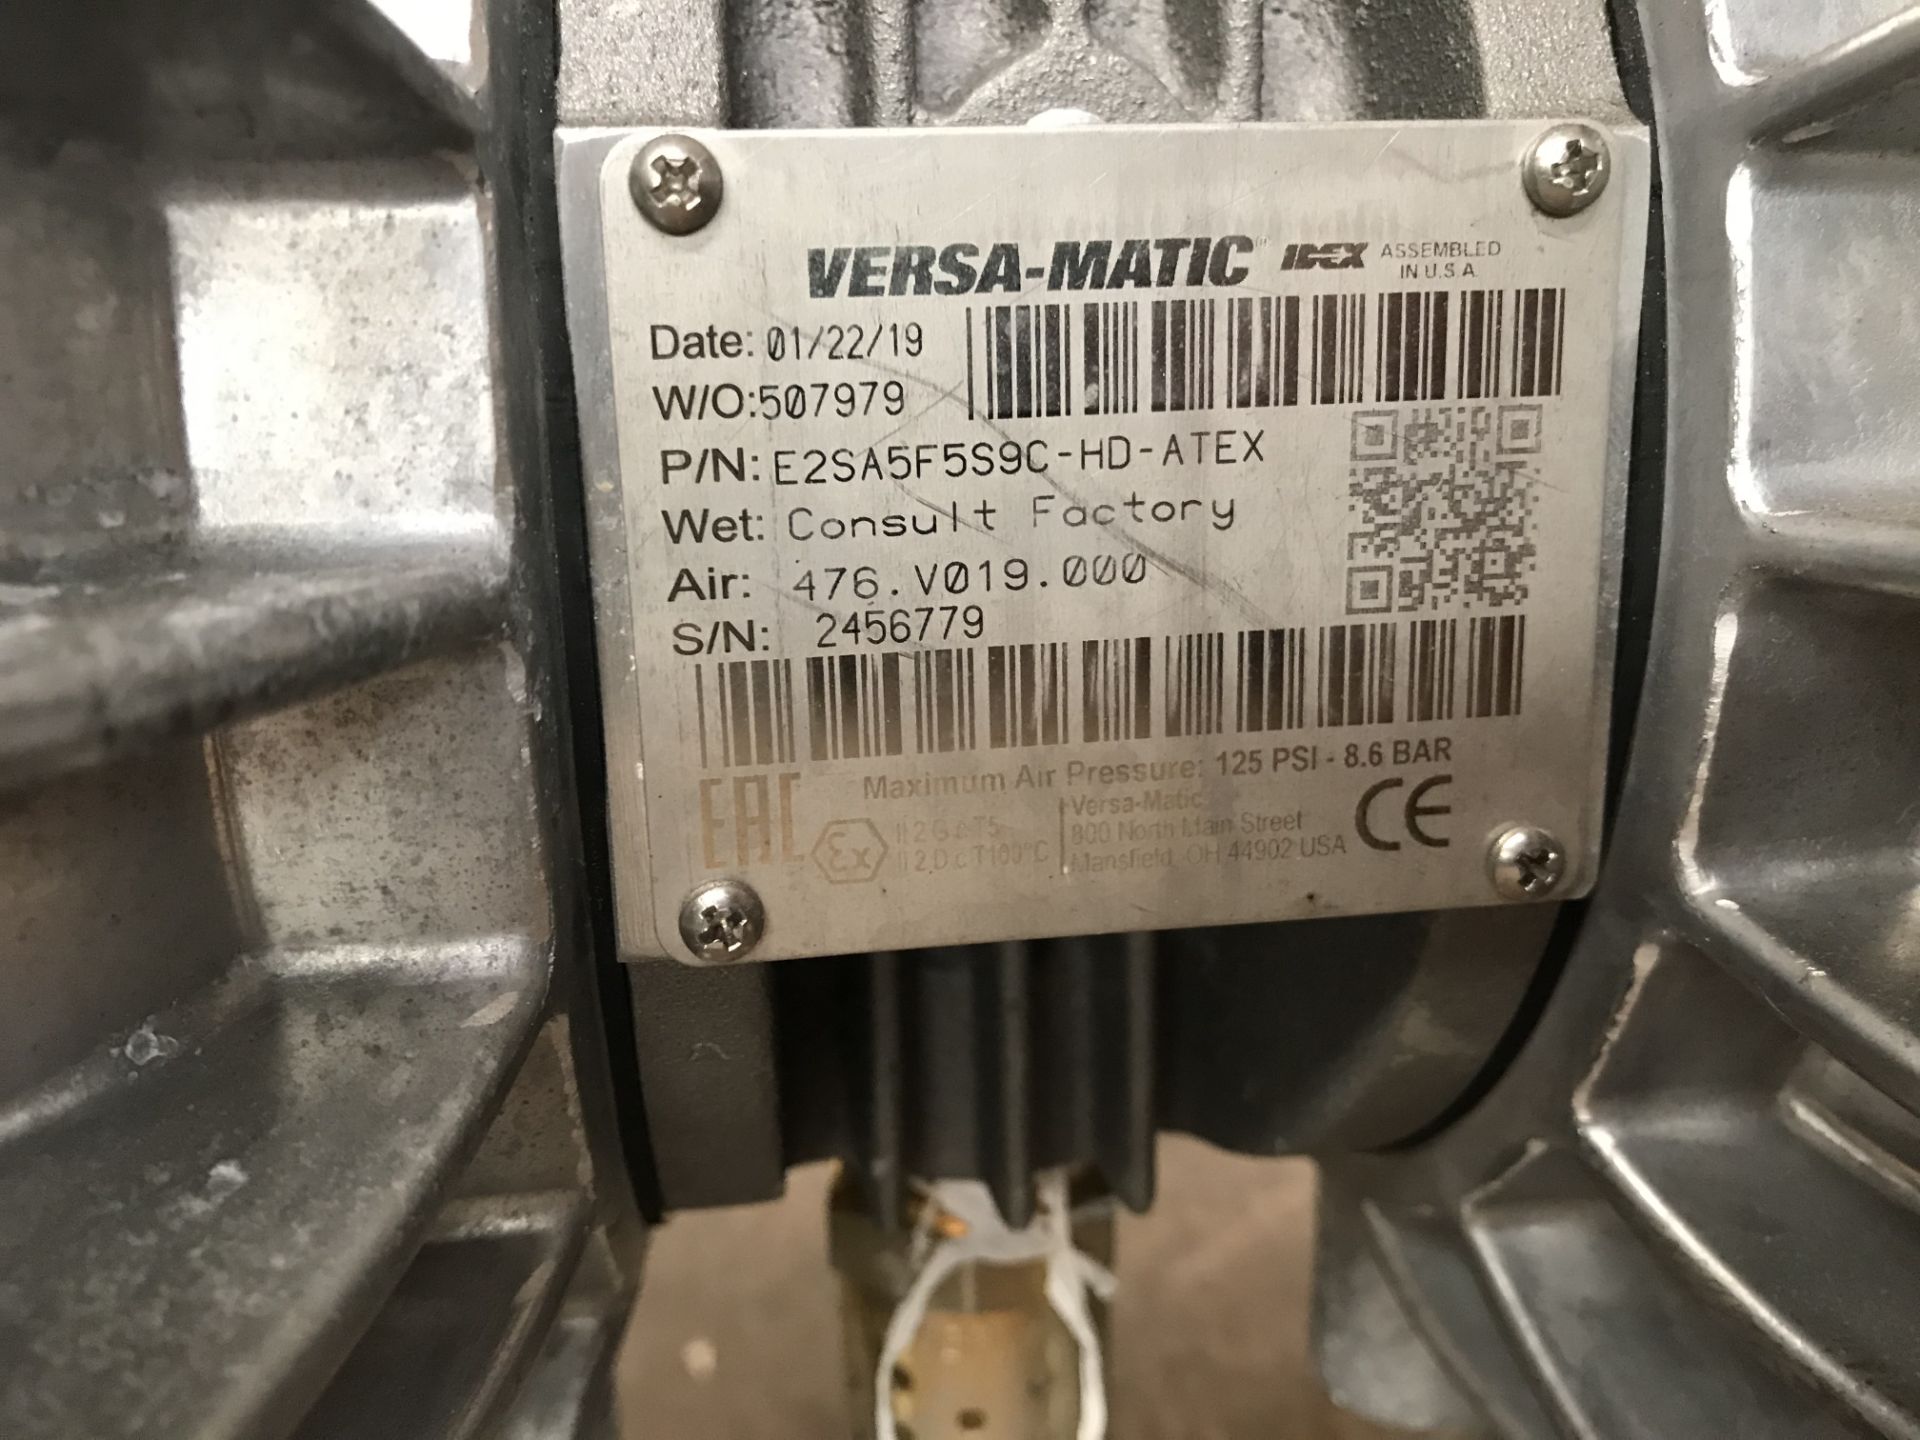 Versa-Matic 2"" Air Operated Stainless Steel Diaphragm Pump | YOM: 2019 | Ref: A343 - Image 4 of 4